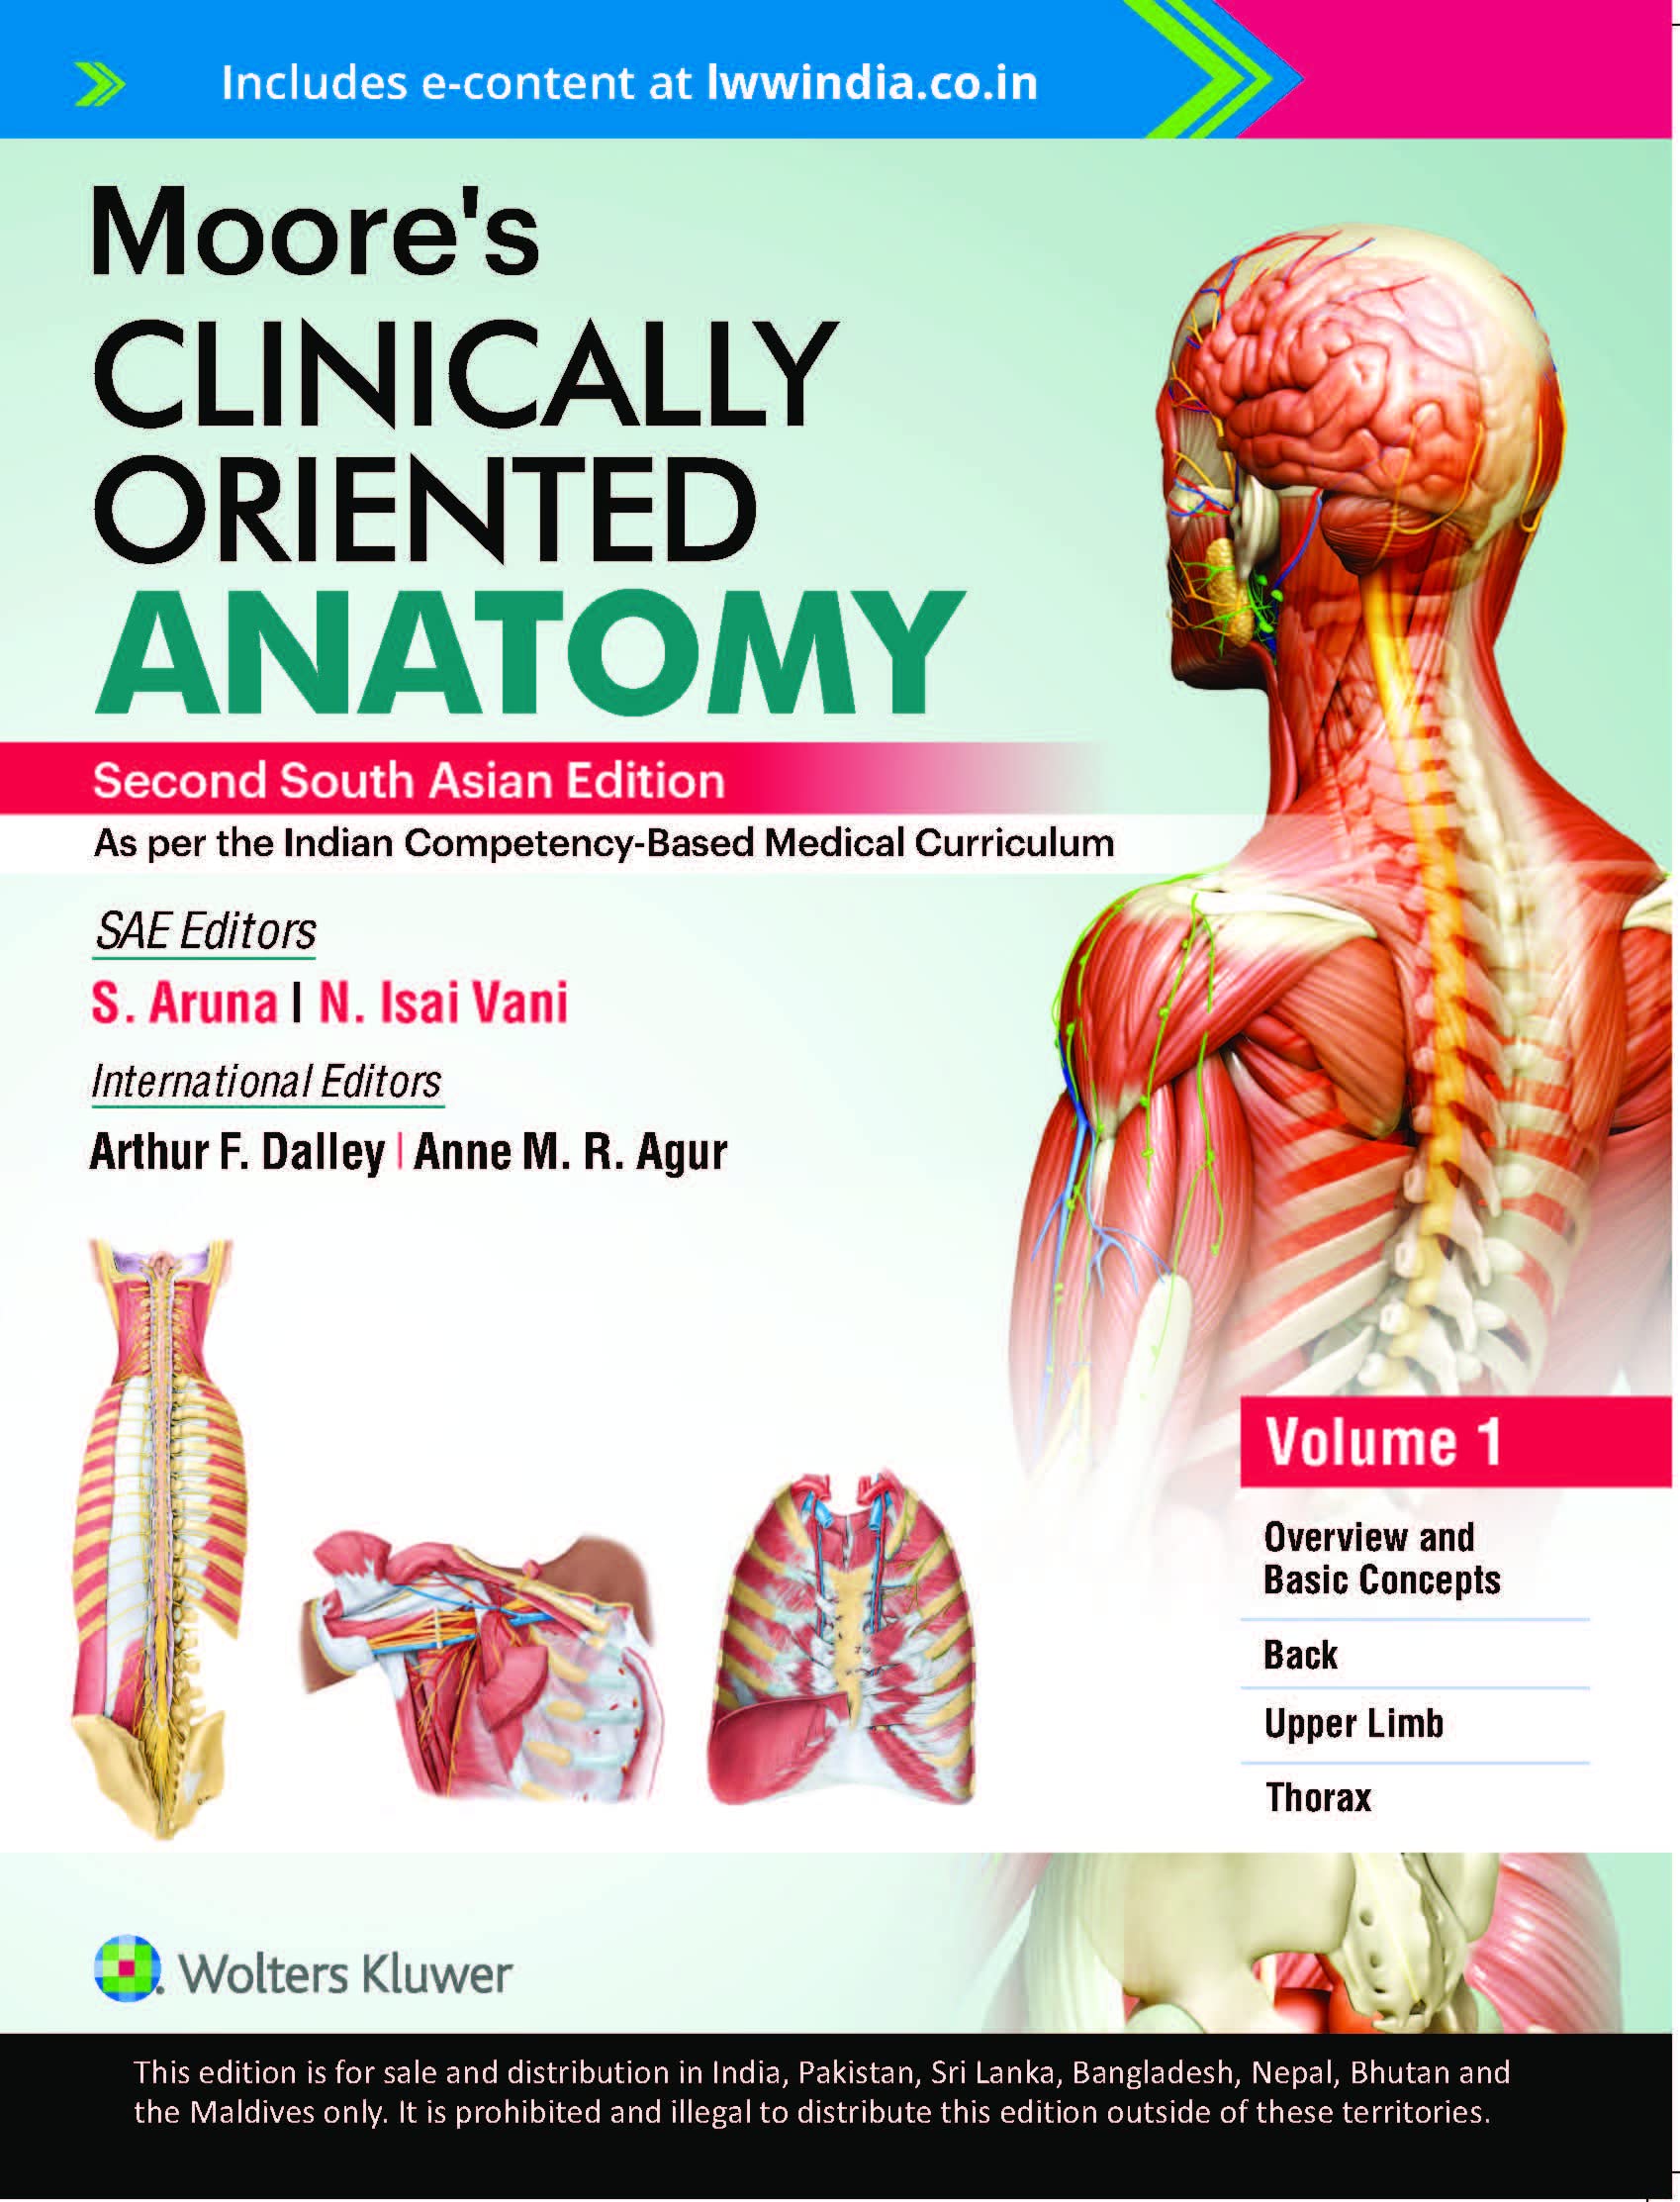 Moore’s Clinically Oriented Anatomy, (3-Volume set), Second South Asian Edition by Aruna/ Vani